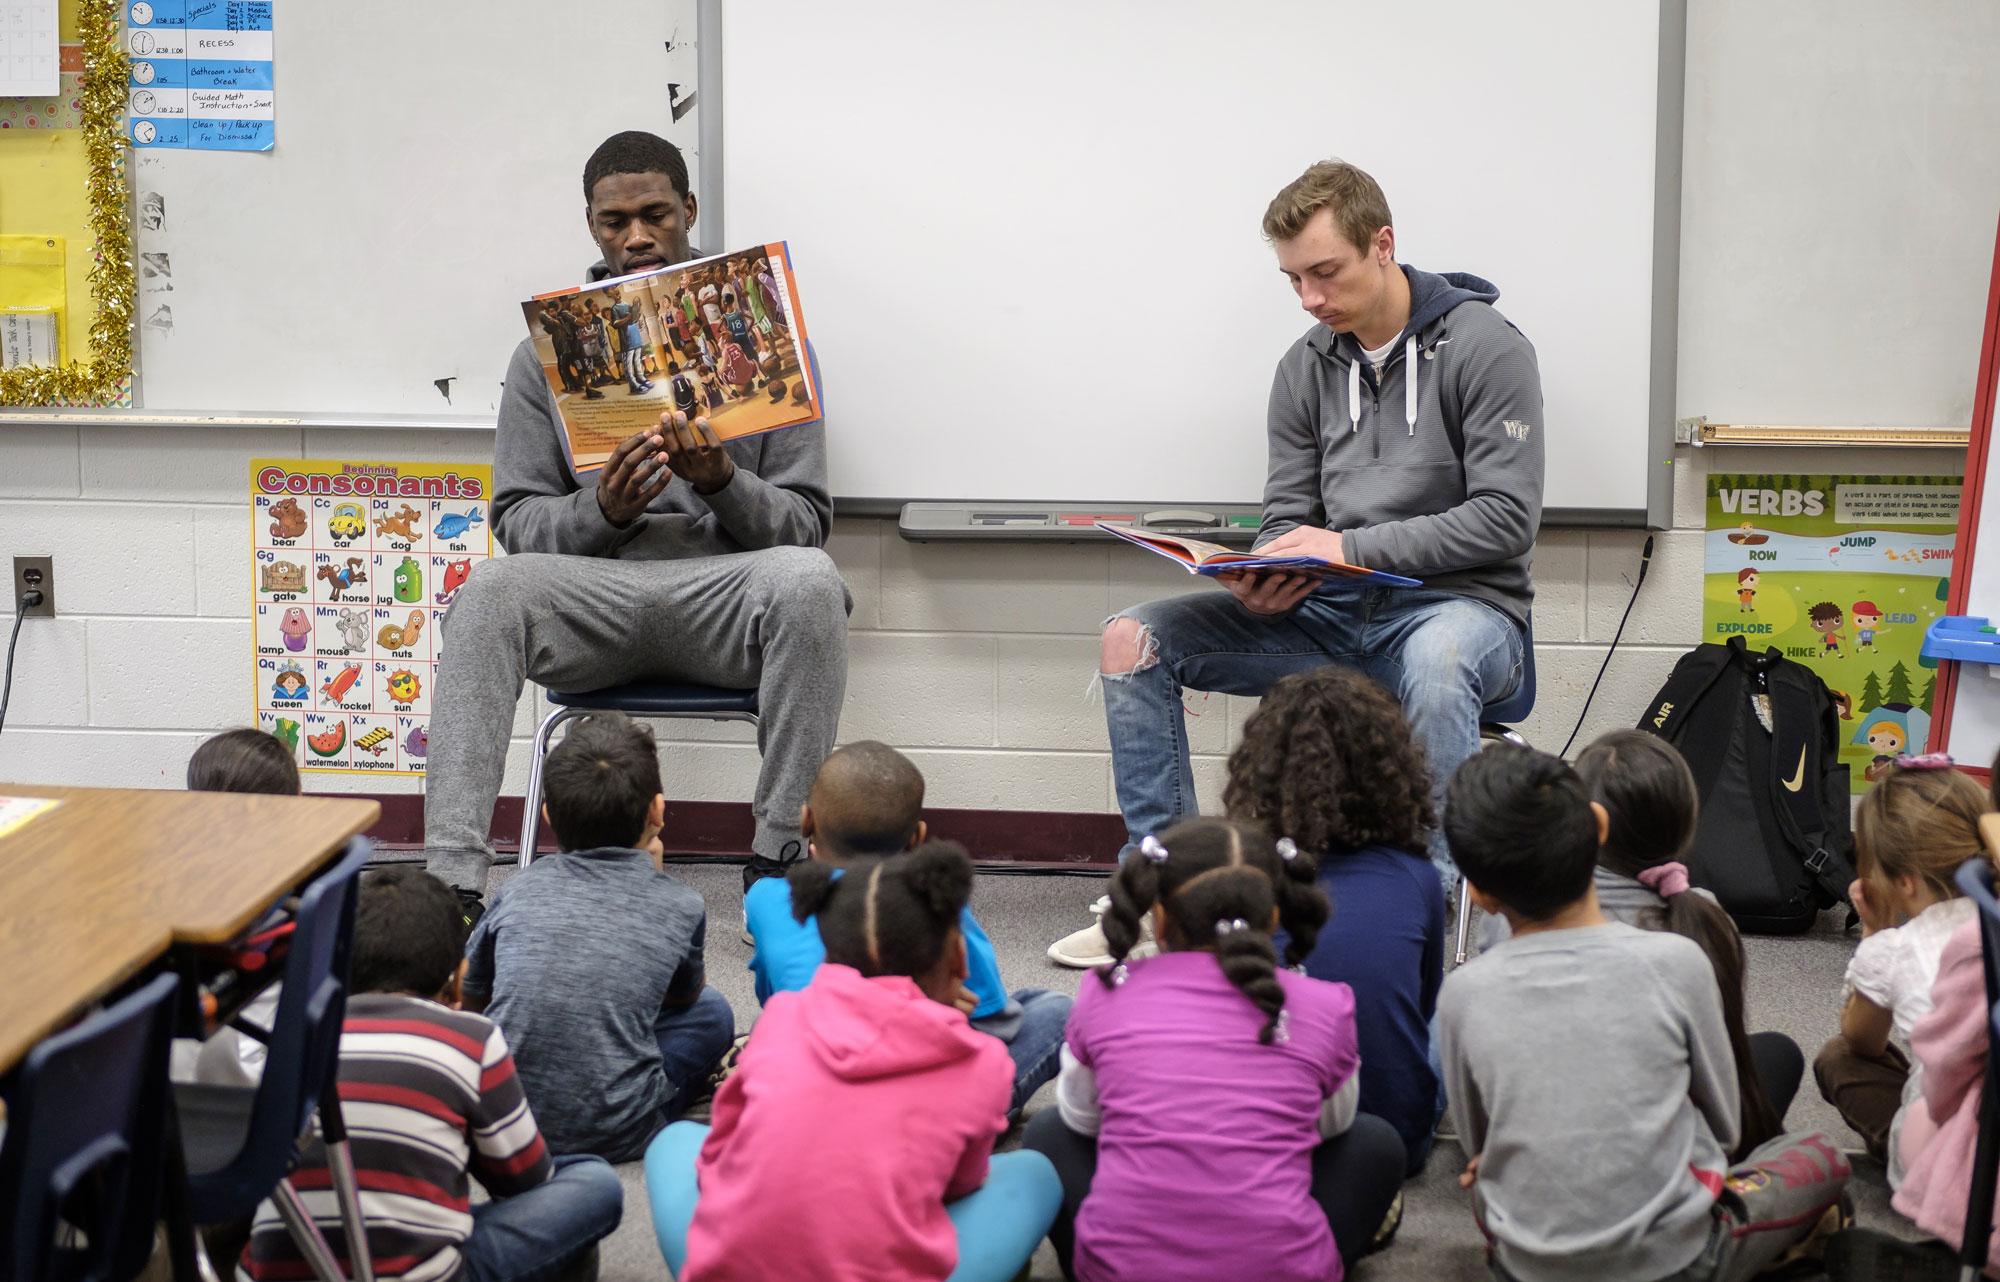 Two teachers reading to a group of young students